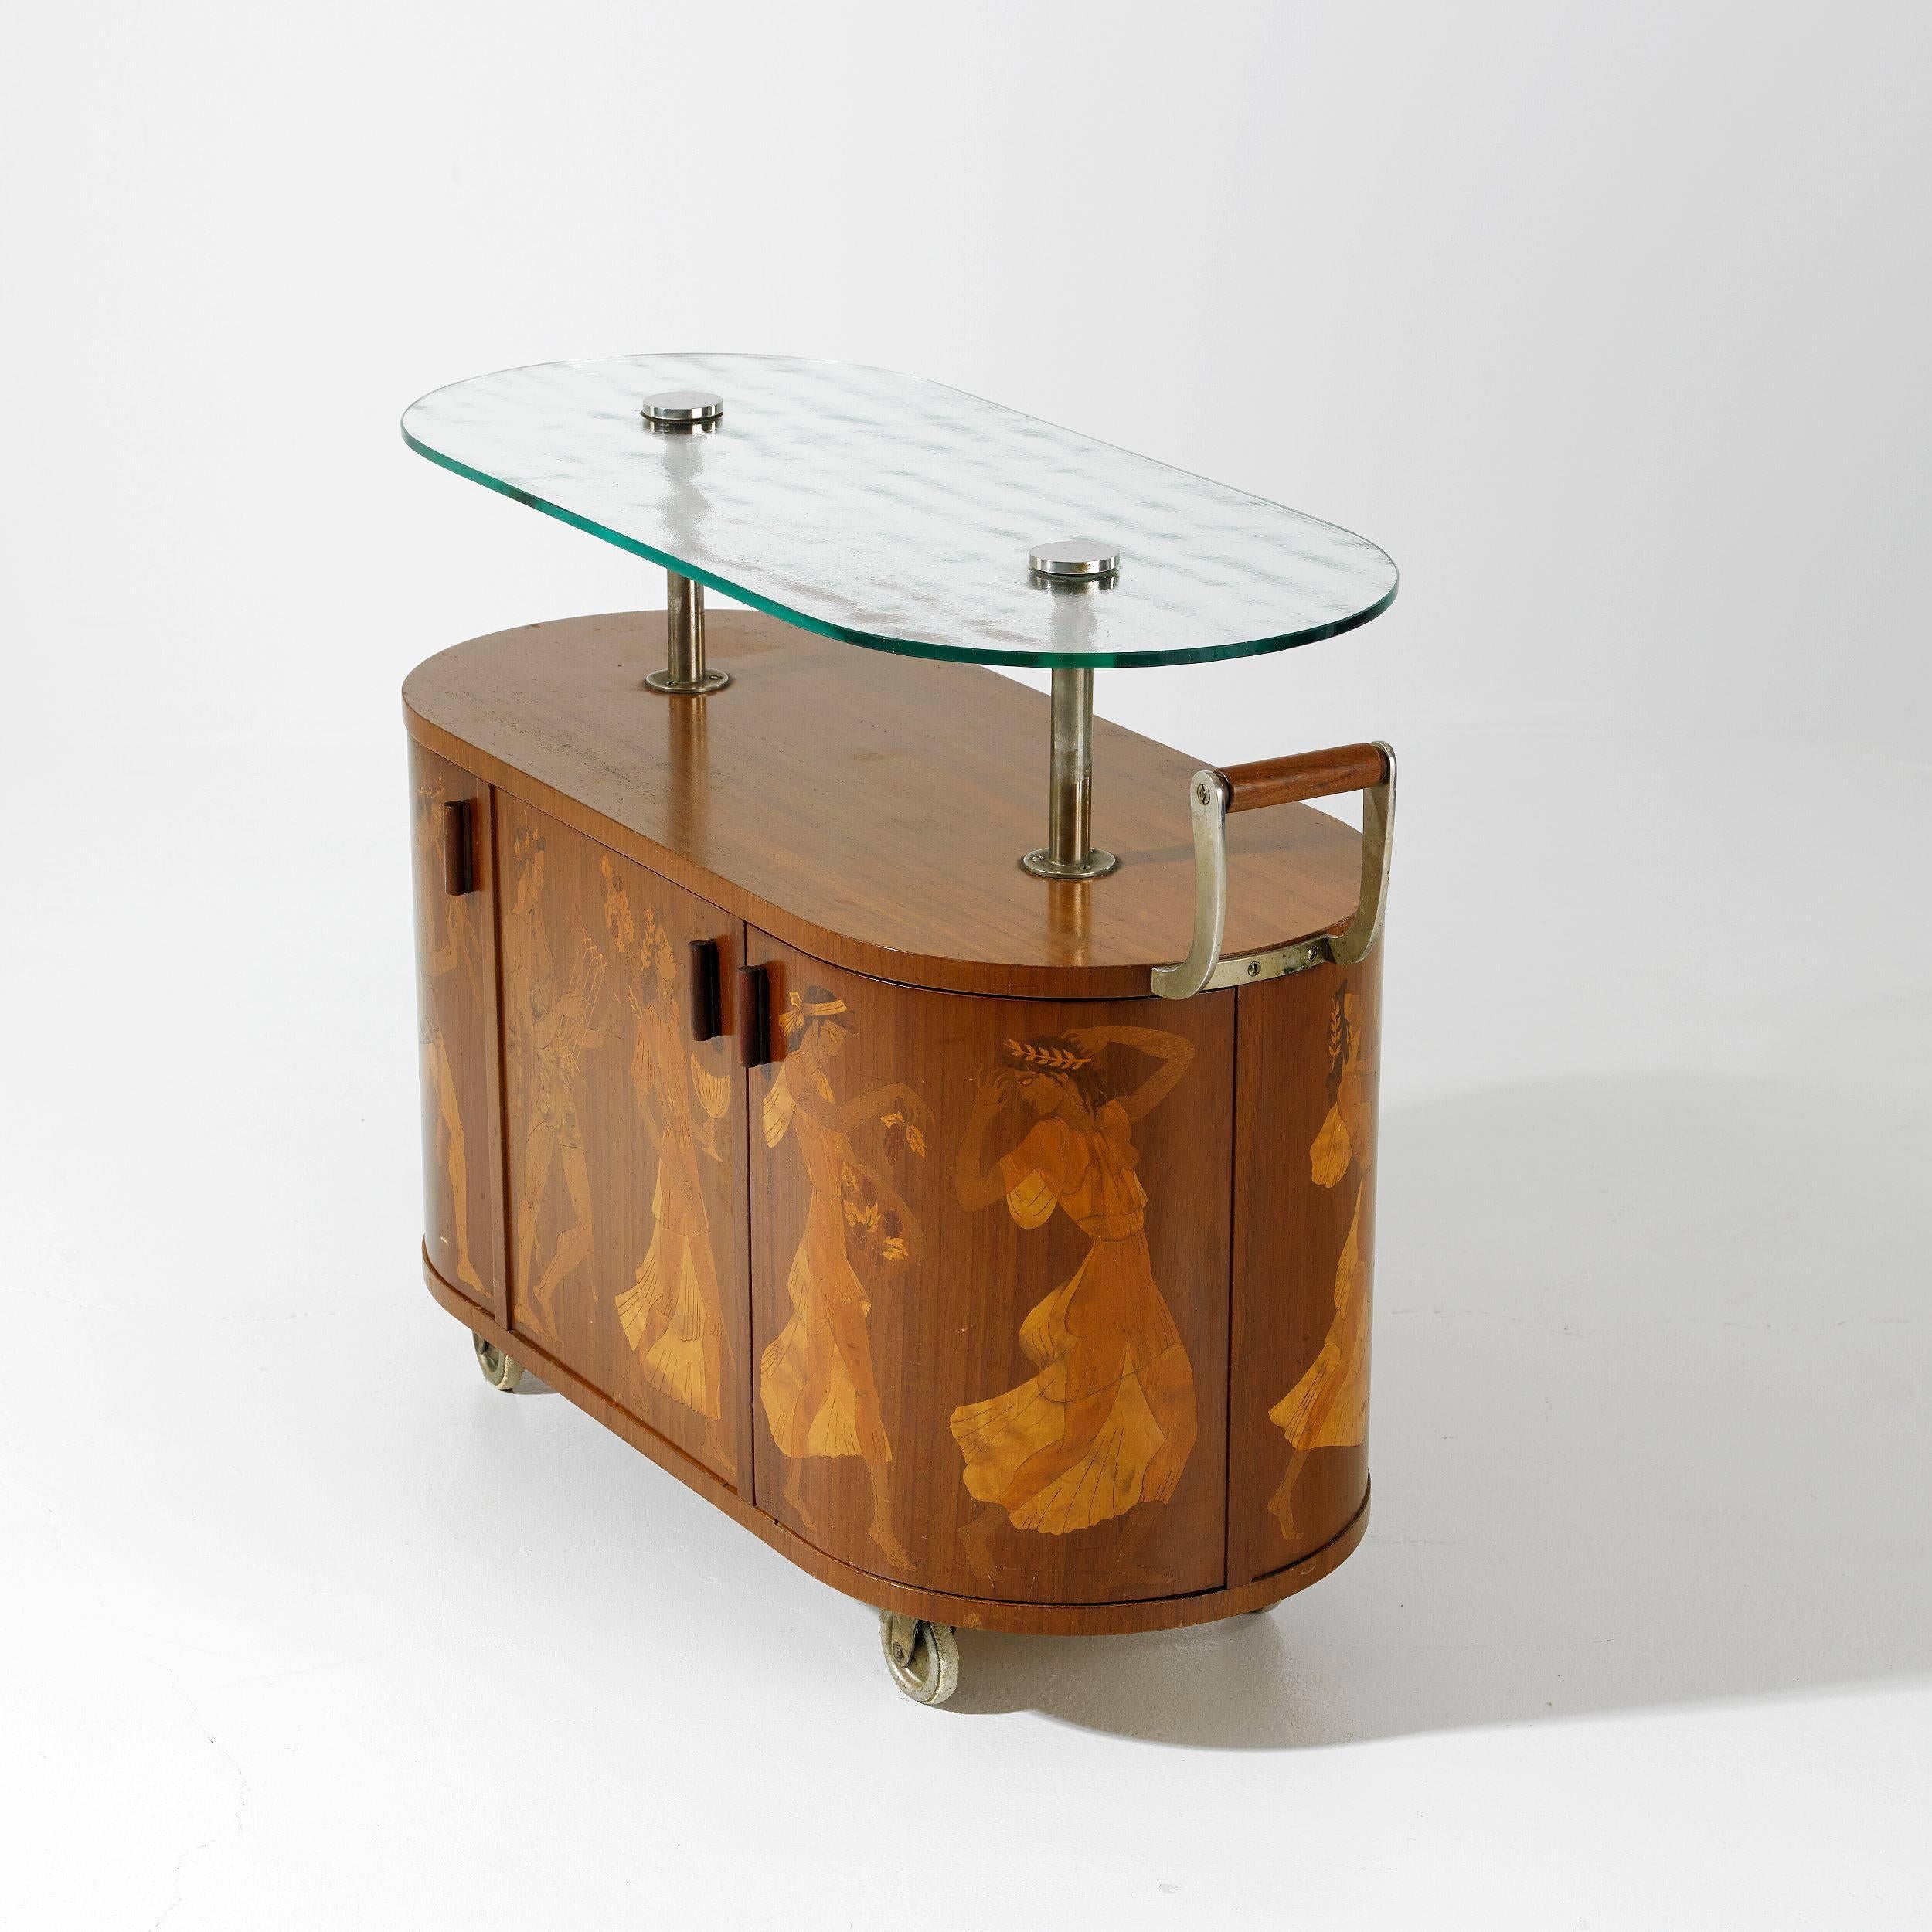 This rare mahogany bar on four wheels with intarsia in different woods depicts the "Bacchusparade". It opens on both front and back with a small drawer on one side in the center. Glass top with chrome fixtures, handle of mahogany and